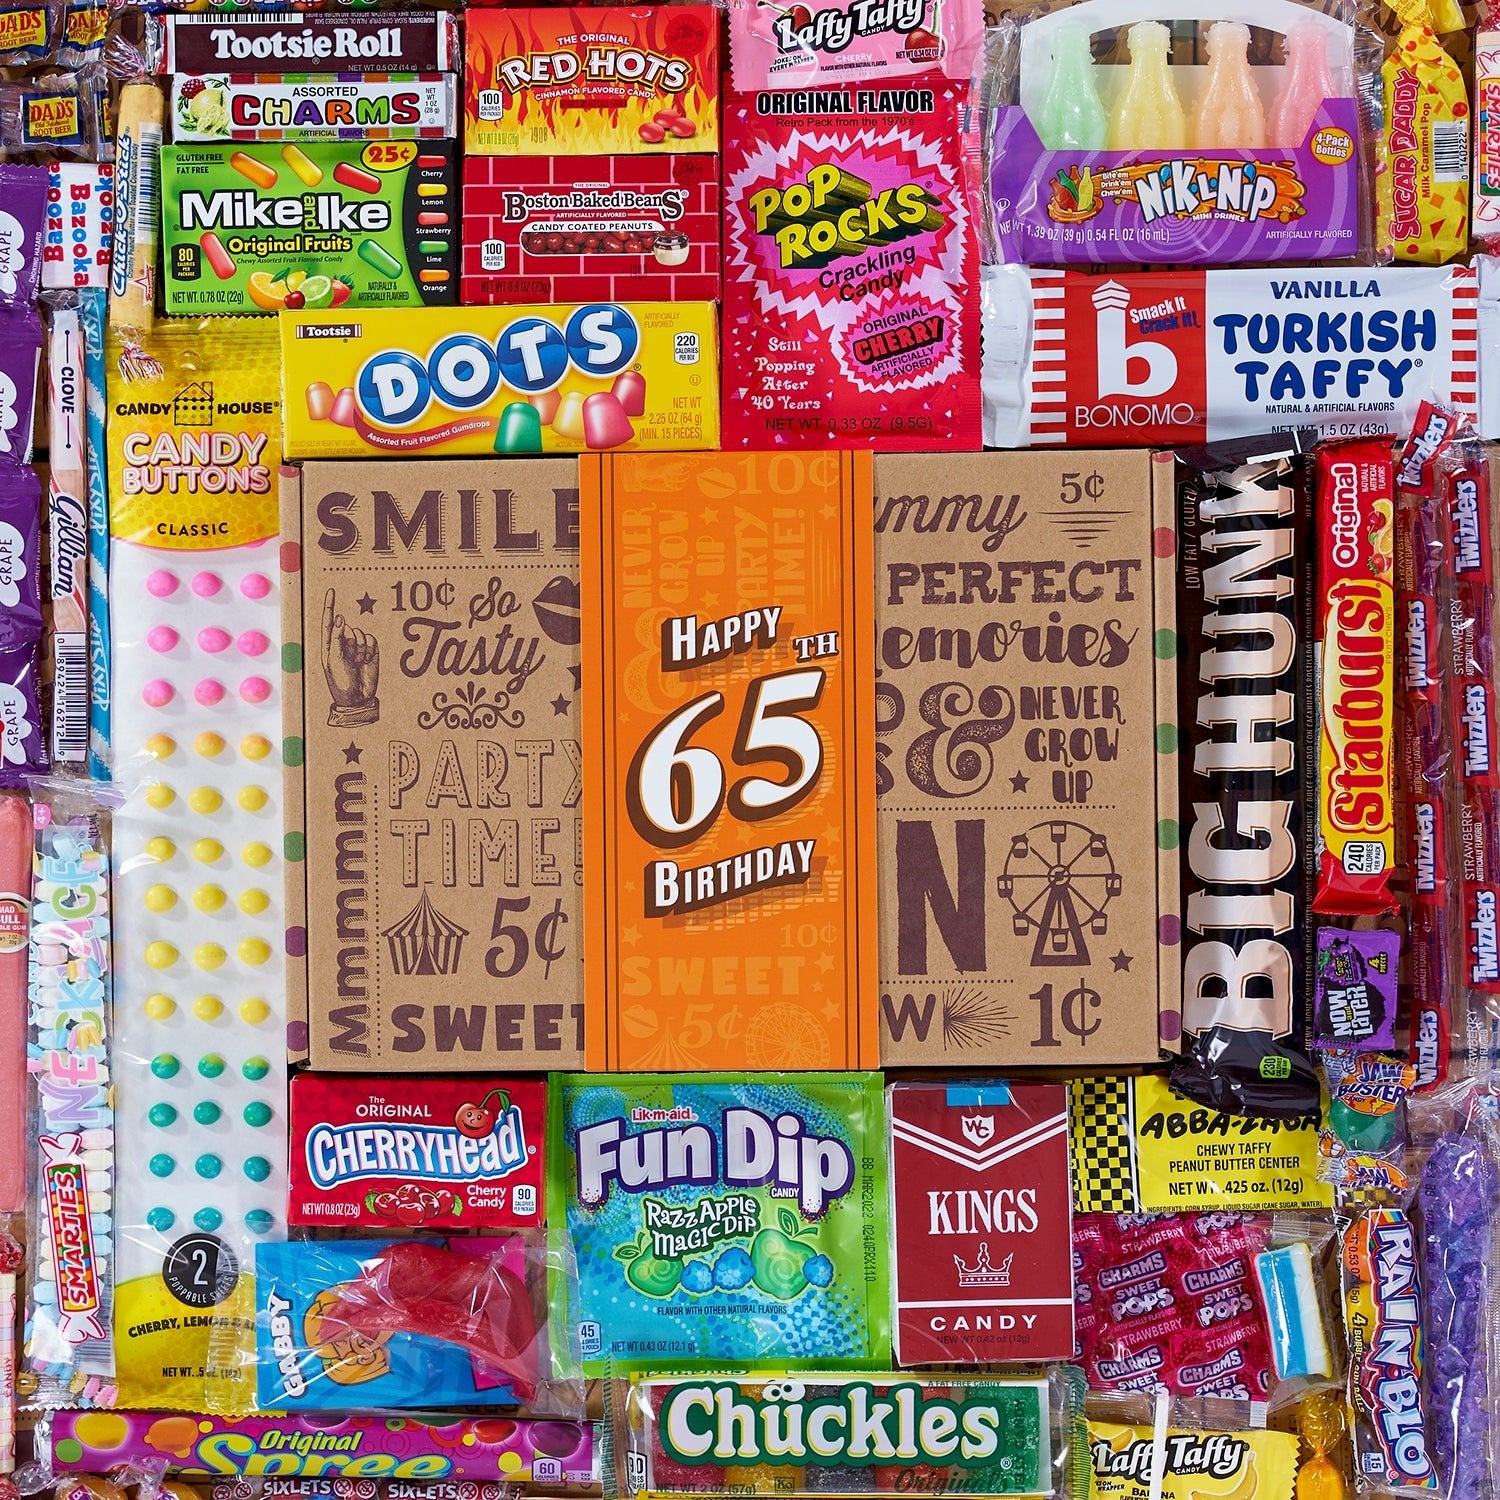 65th Birthday Retro Candy Gift - Vintage Candy Co.